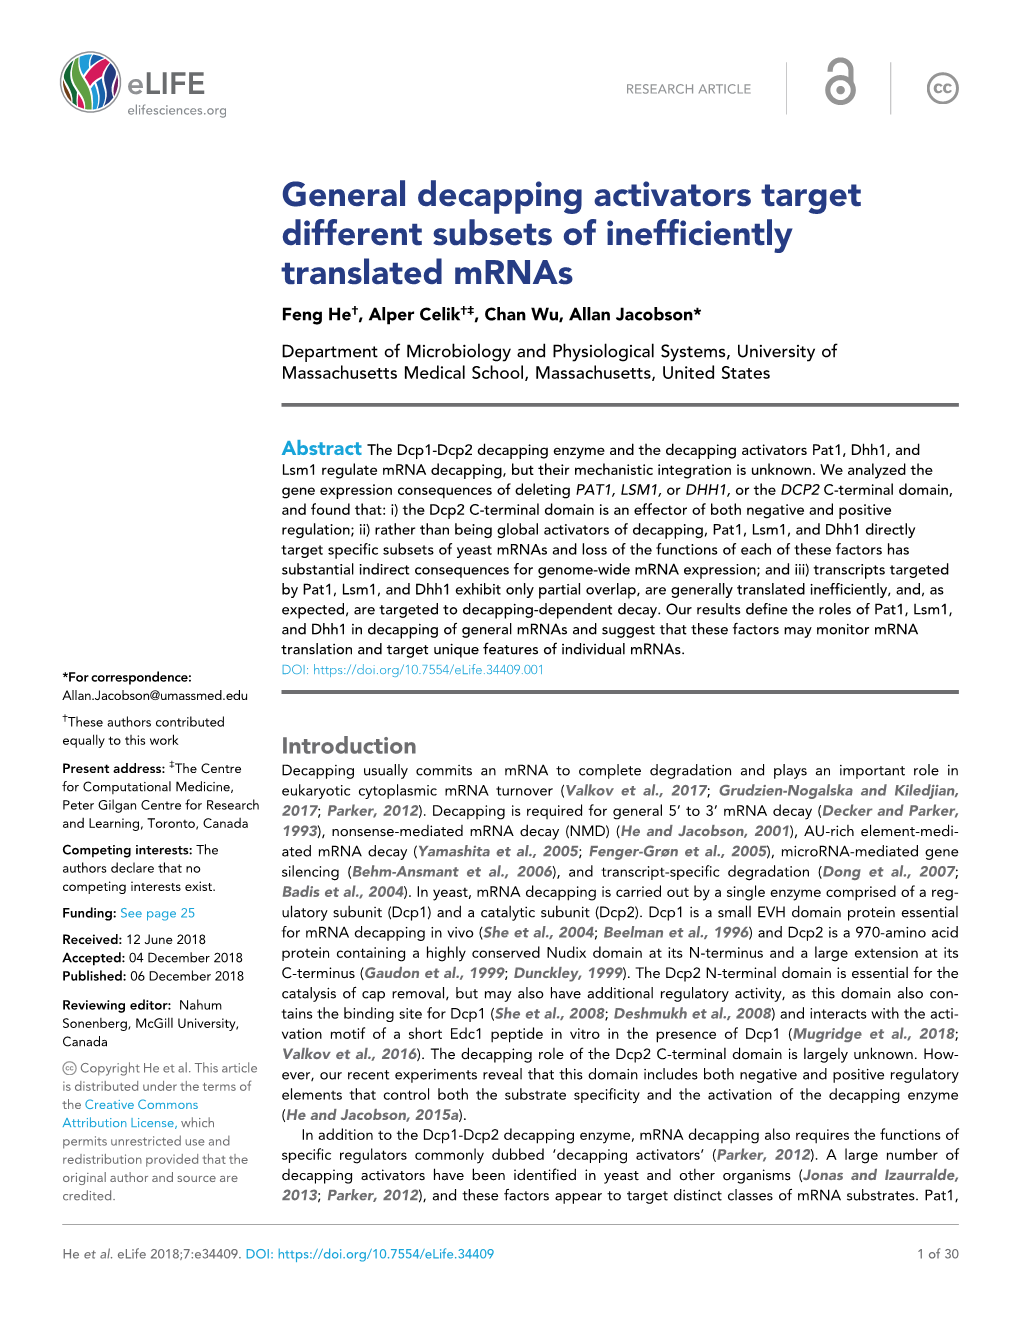 General Decapping Activators Target Different Subsets of Inefficiently Translated Mrnas Feng He†, Alper Celik†‡, Chan Wu, Allan Jacobson*